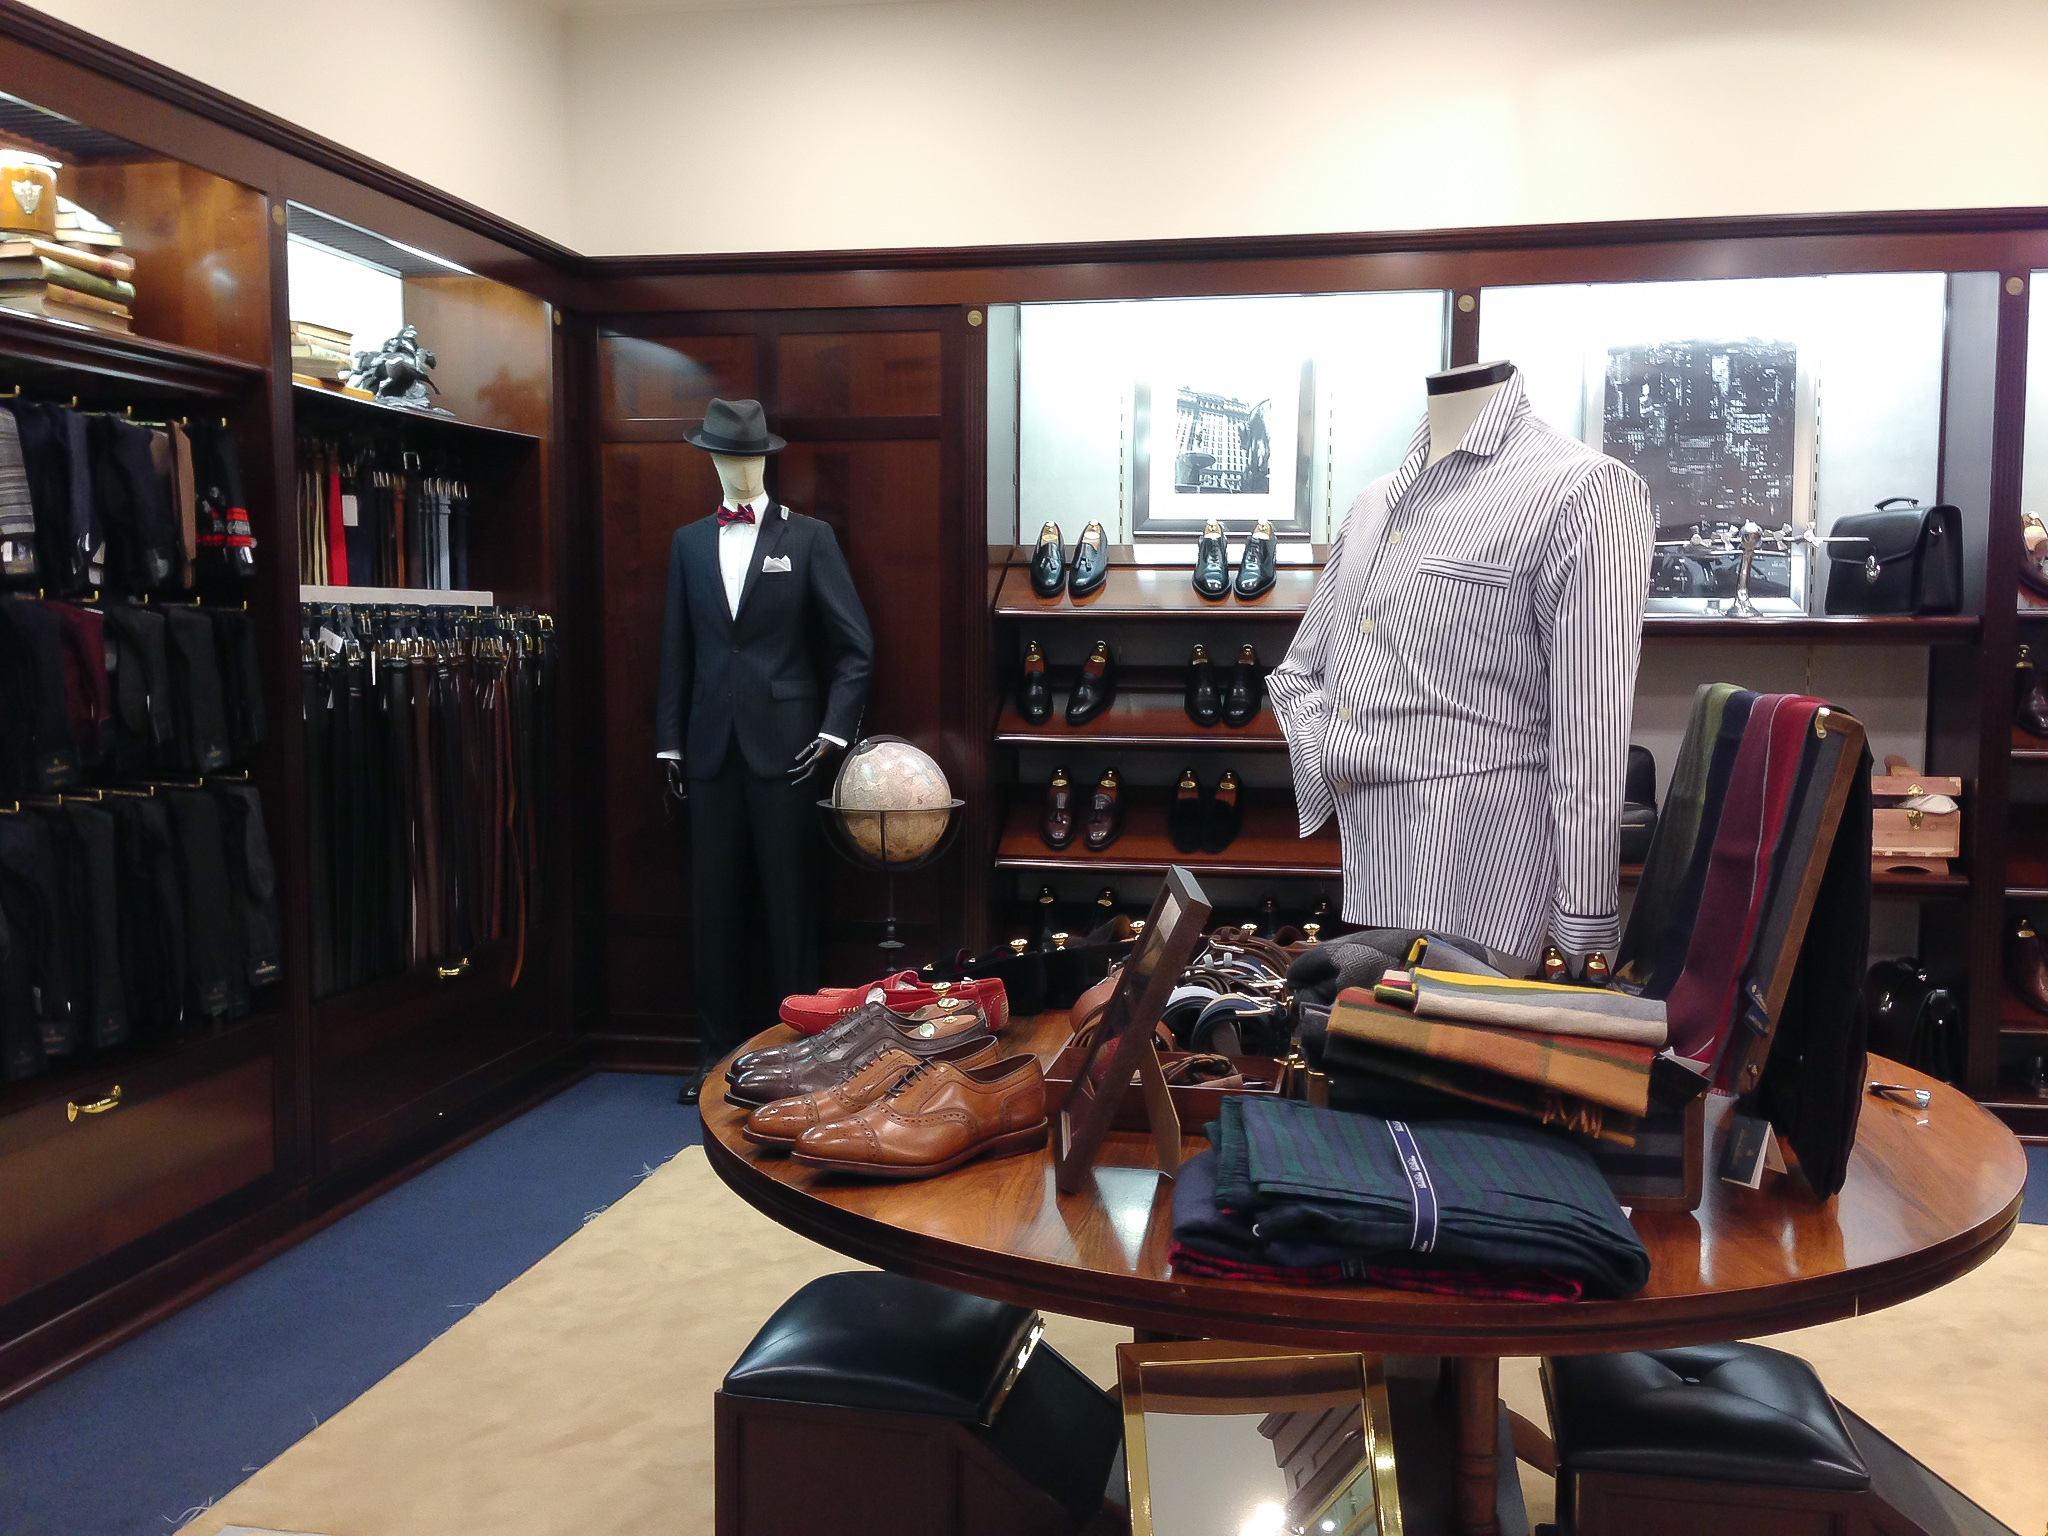 Classic menswear at Brooks Brothers in London. Photo by alphacityguides.